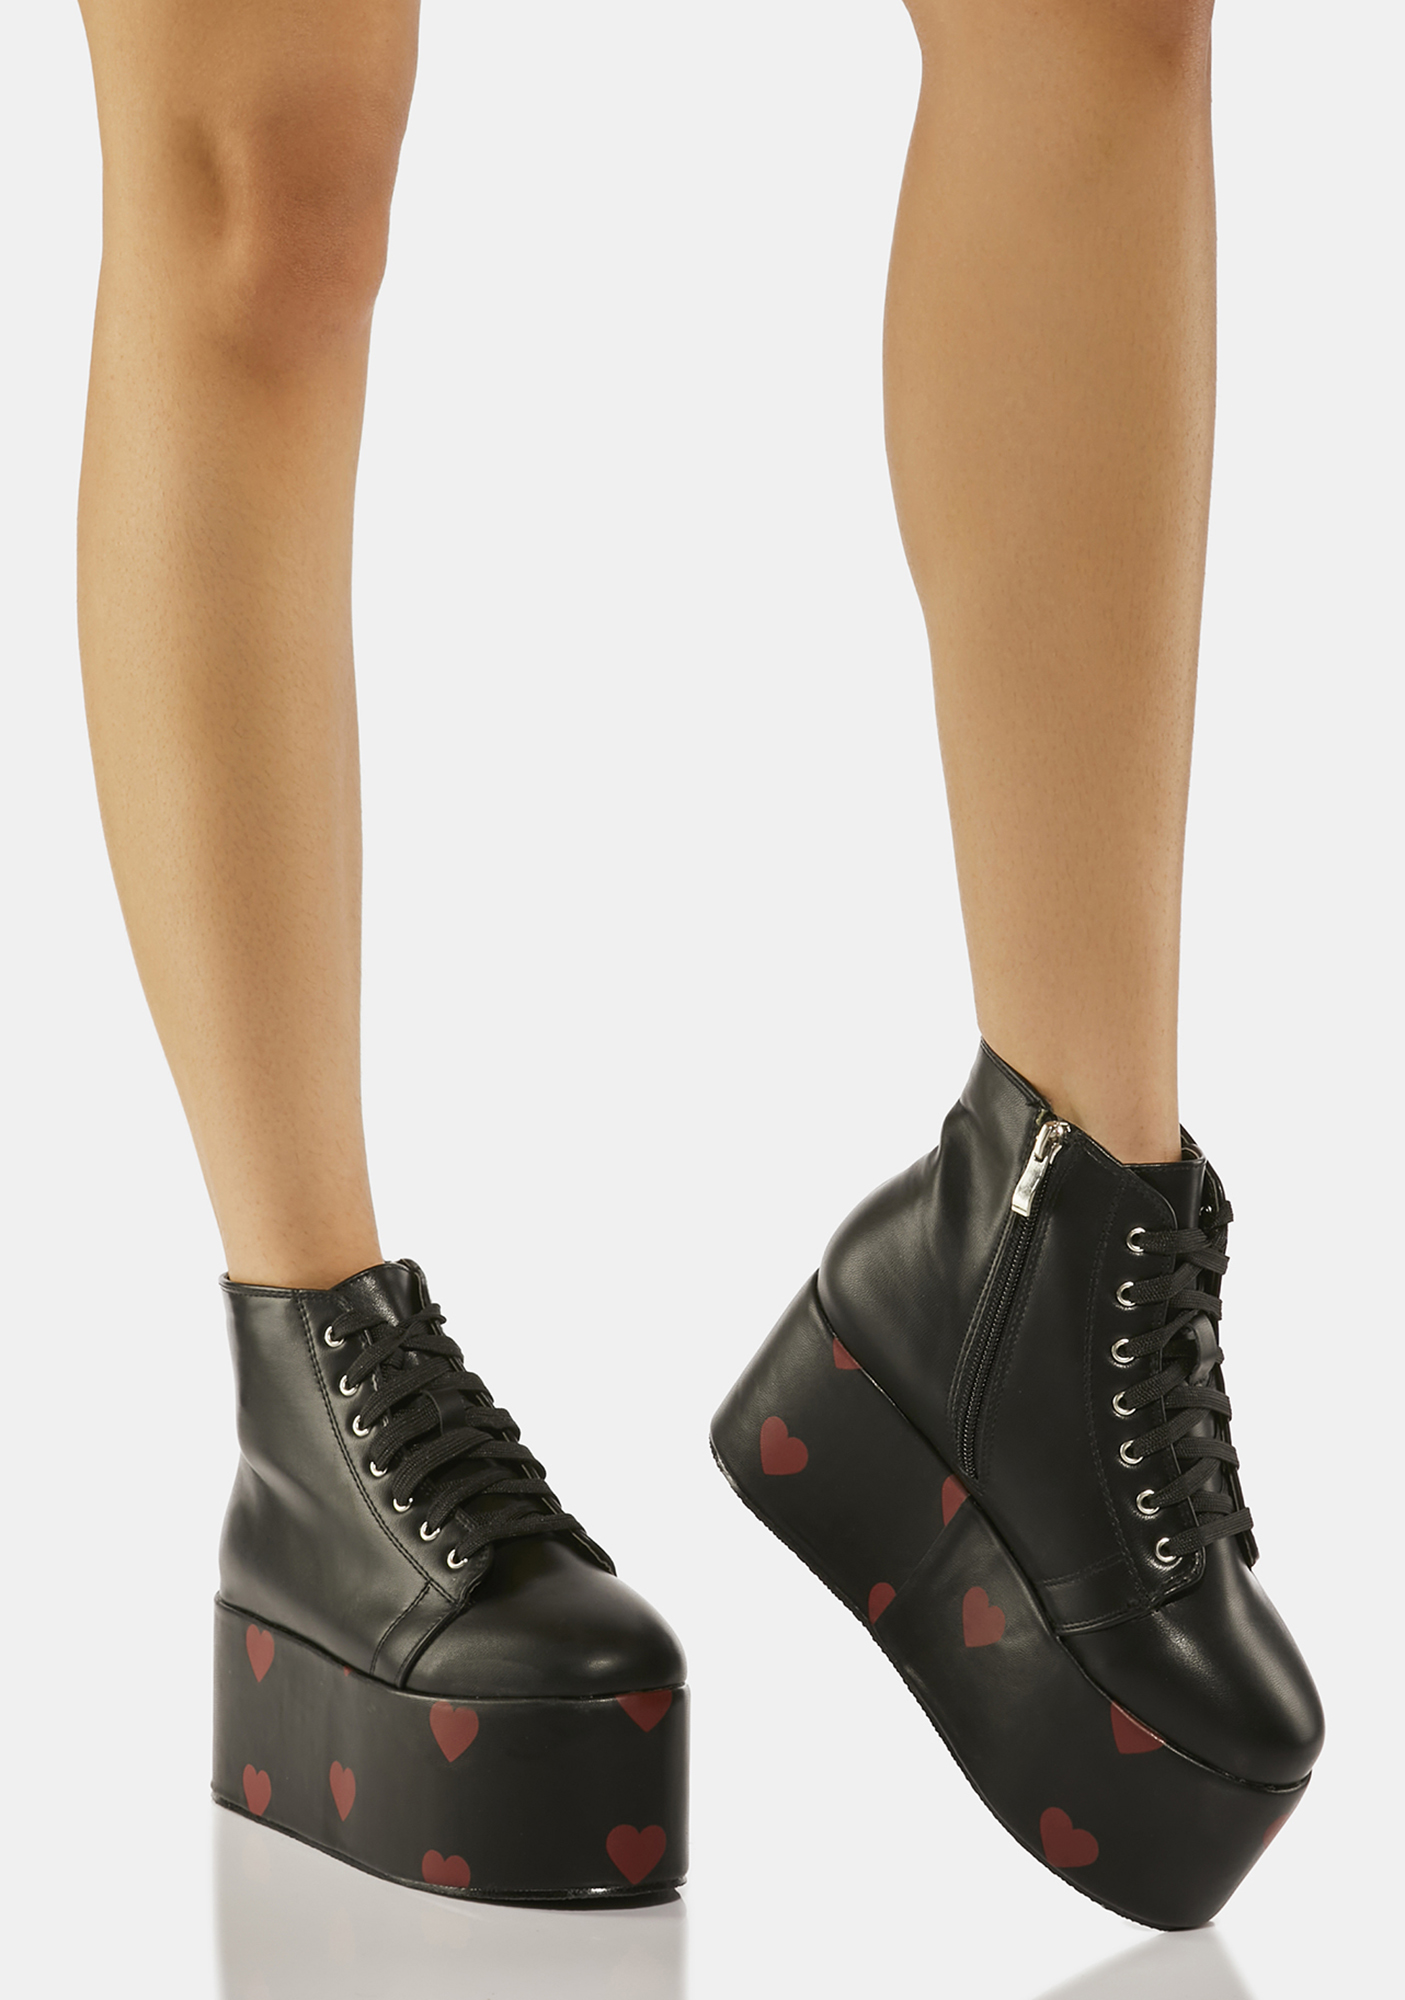 Vegan Leather Lace Up Heart Print Platform Ankle Boots - Black/Red ...